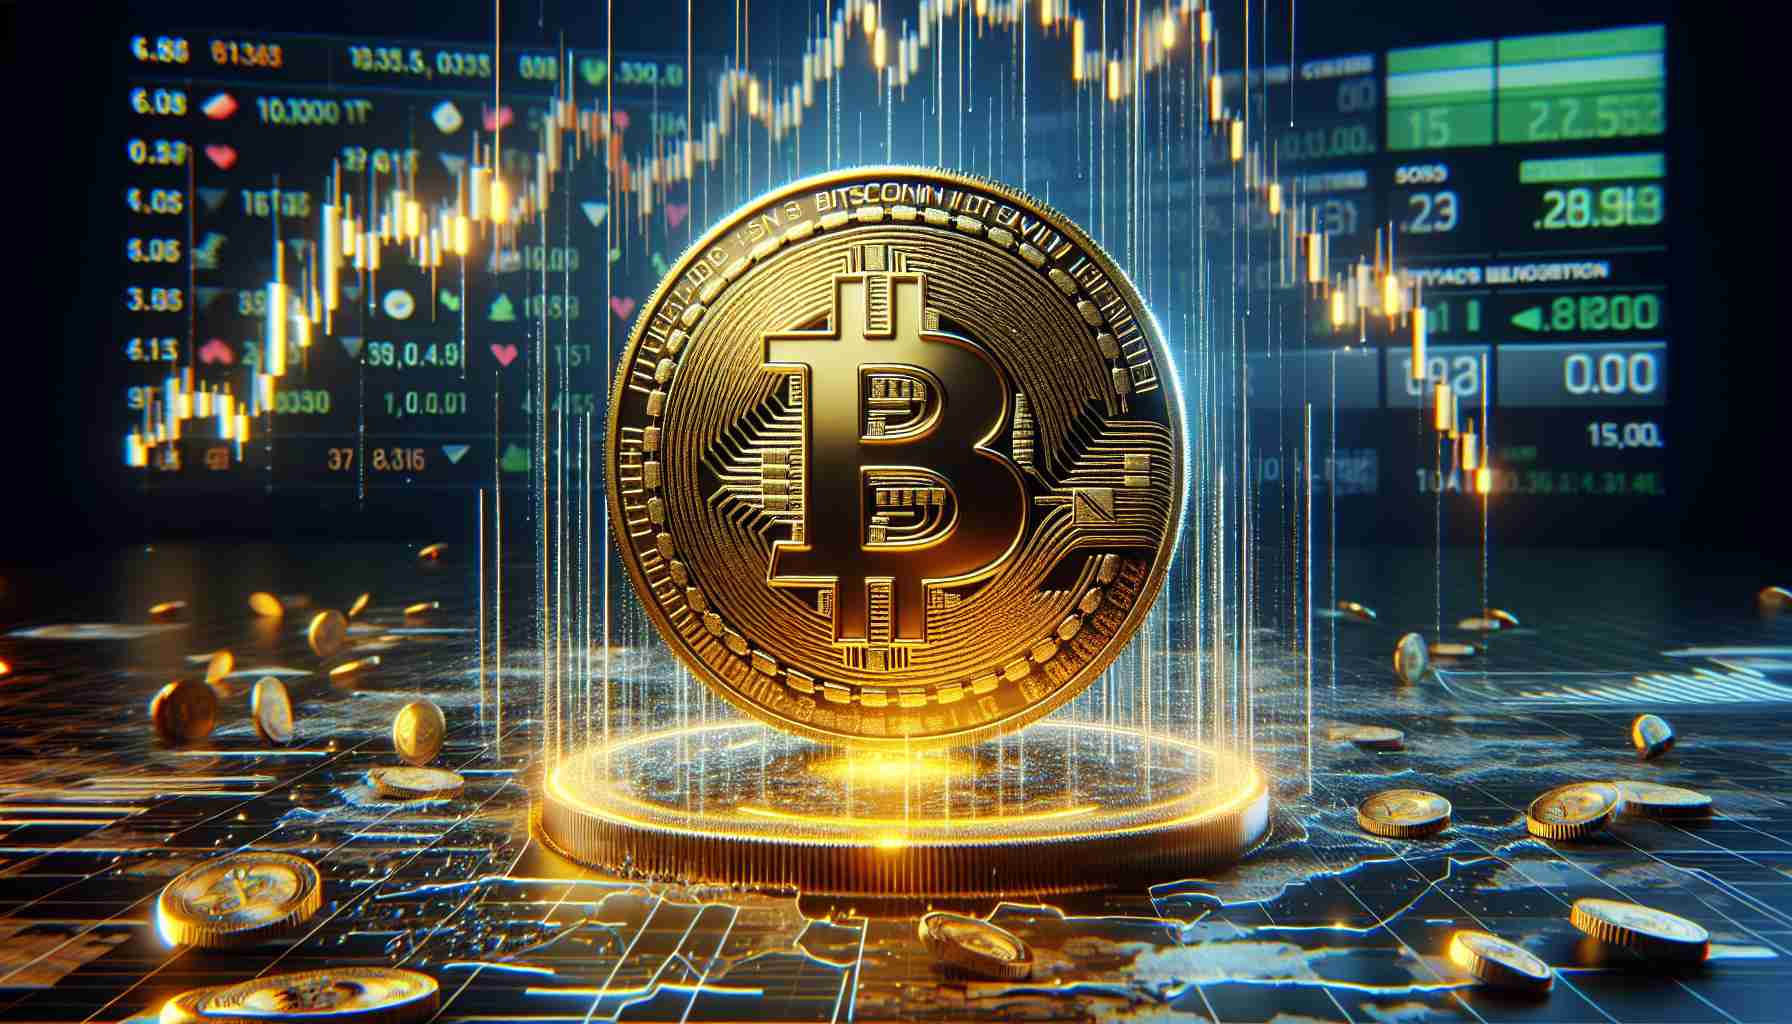 A high-definition, realistic image representative of Bitcoin's resilience in the NFT marketplace. Imagine a sturdy and shining golden Bitcoin symbol surrounded by falling graphs and charts to symbolize a decline in network activity. Make sure to portray the two spaces - Bitcoin as well as the NFT market - in a stylized visual metaphor. This scene is set on a digital background that resembles a stock market screen with various cryptocurrency tokens.